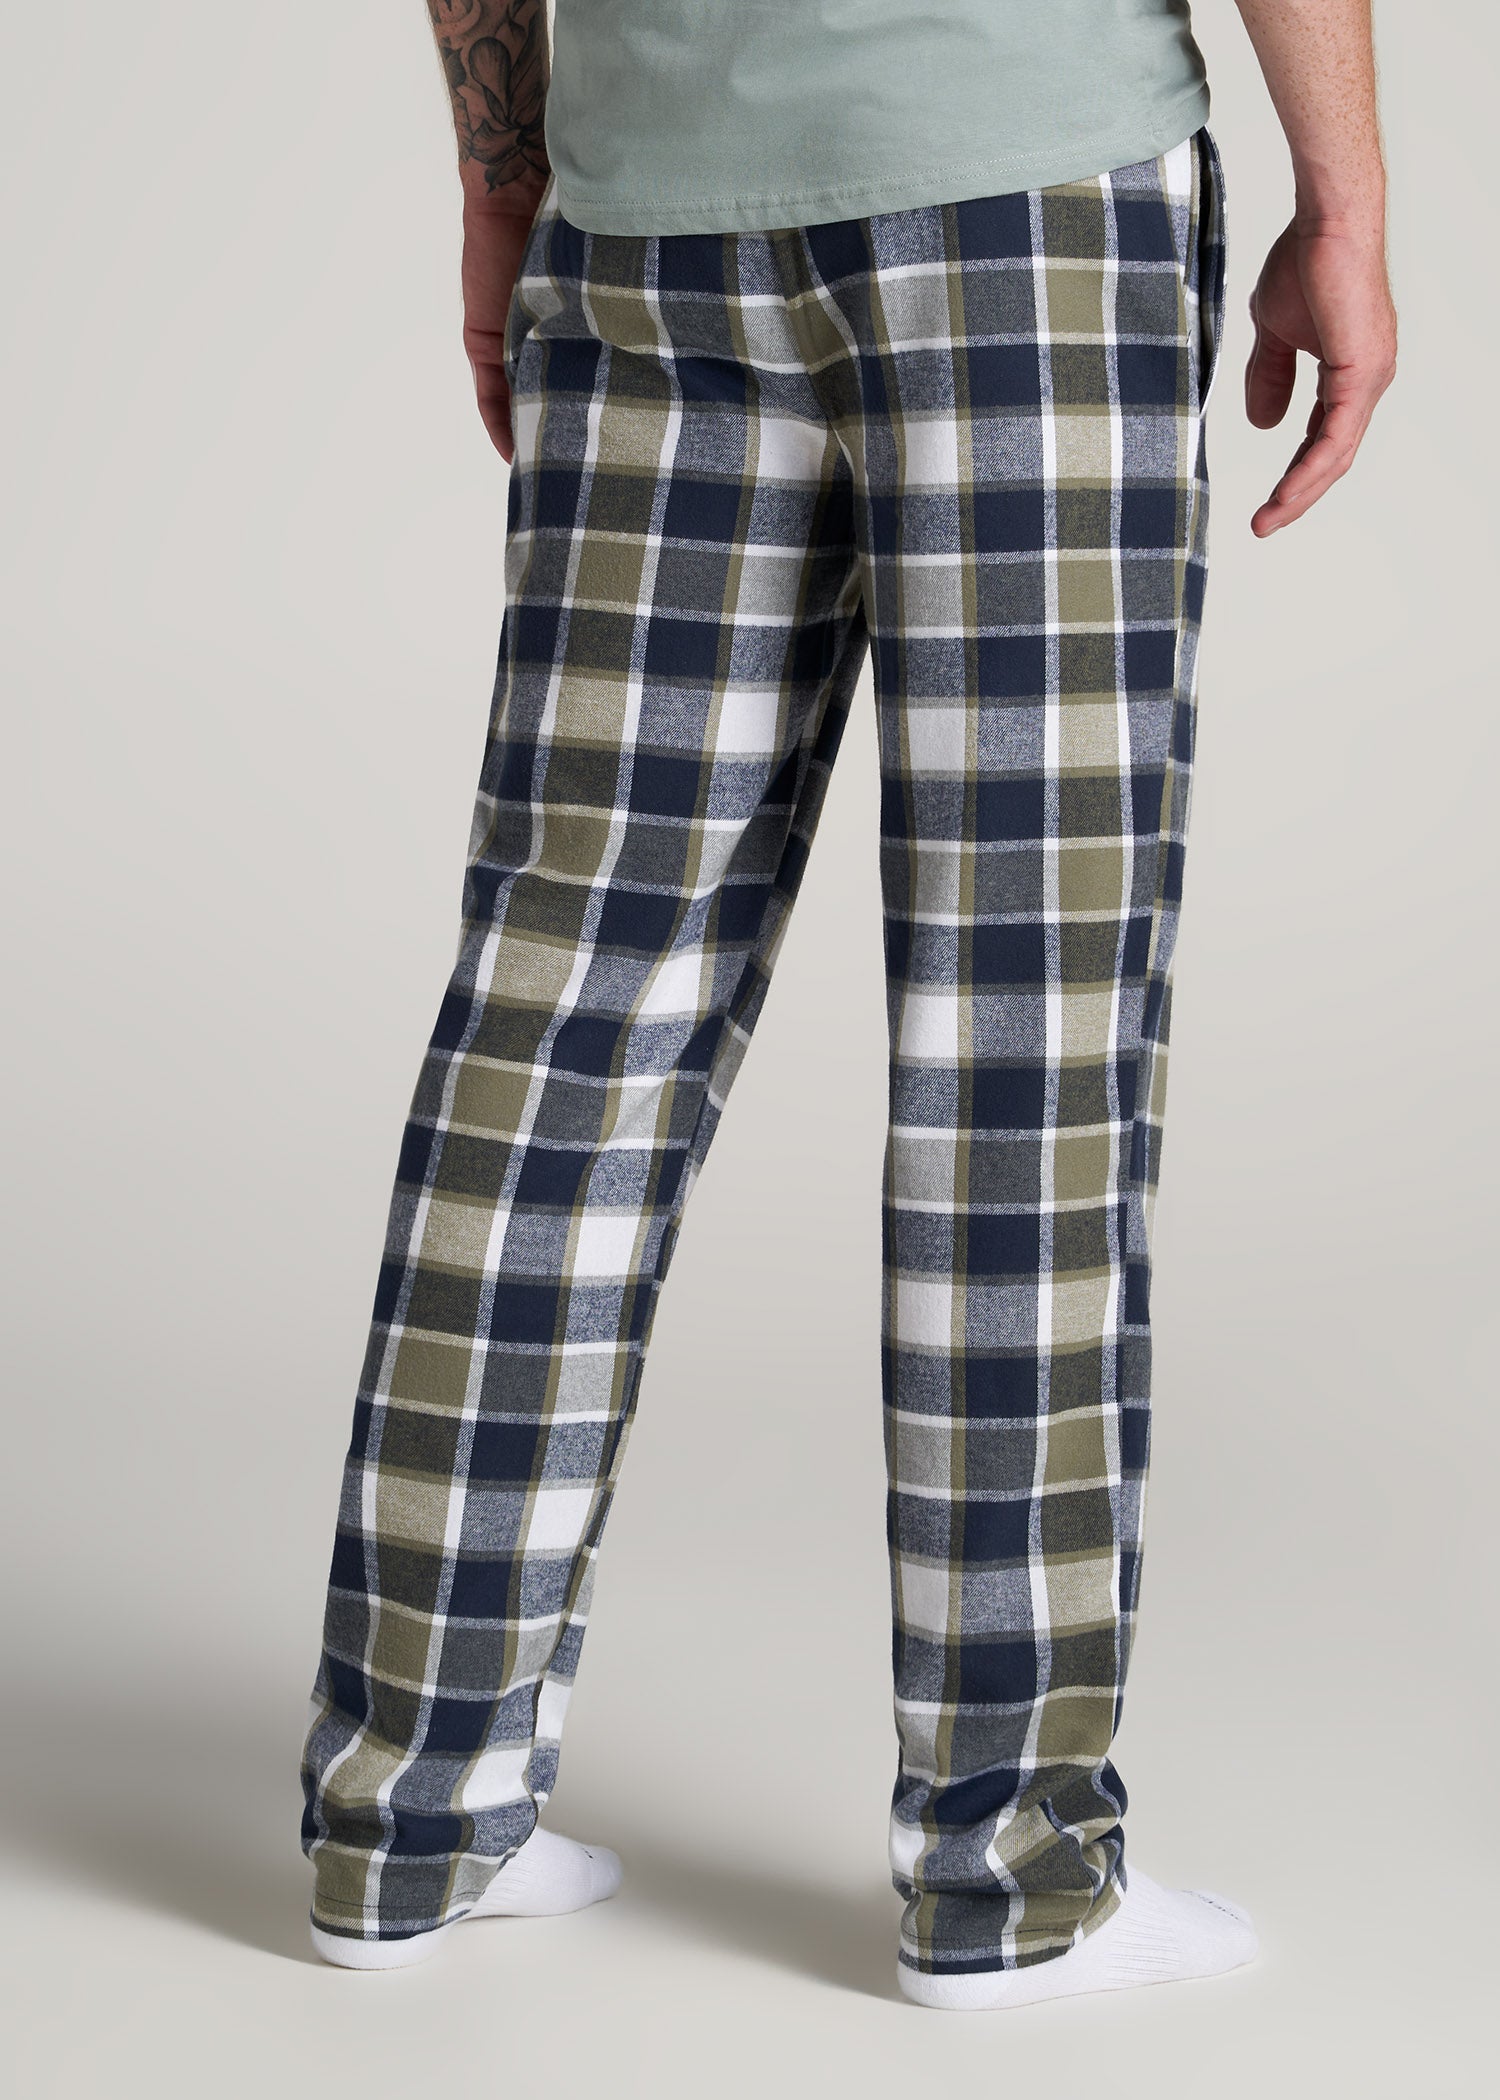 Flannel Lounge Pants  All American Clothing - All American Clothing Co